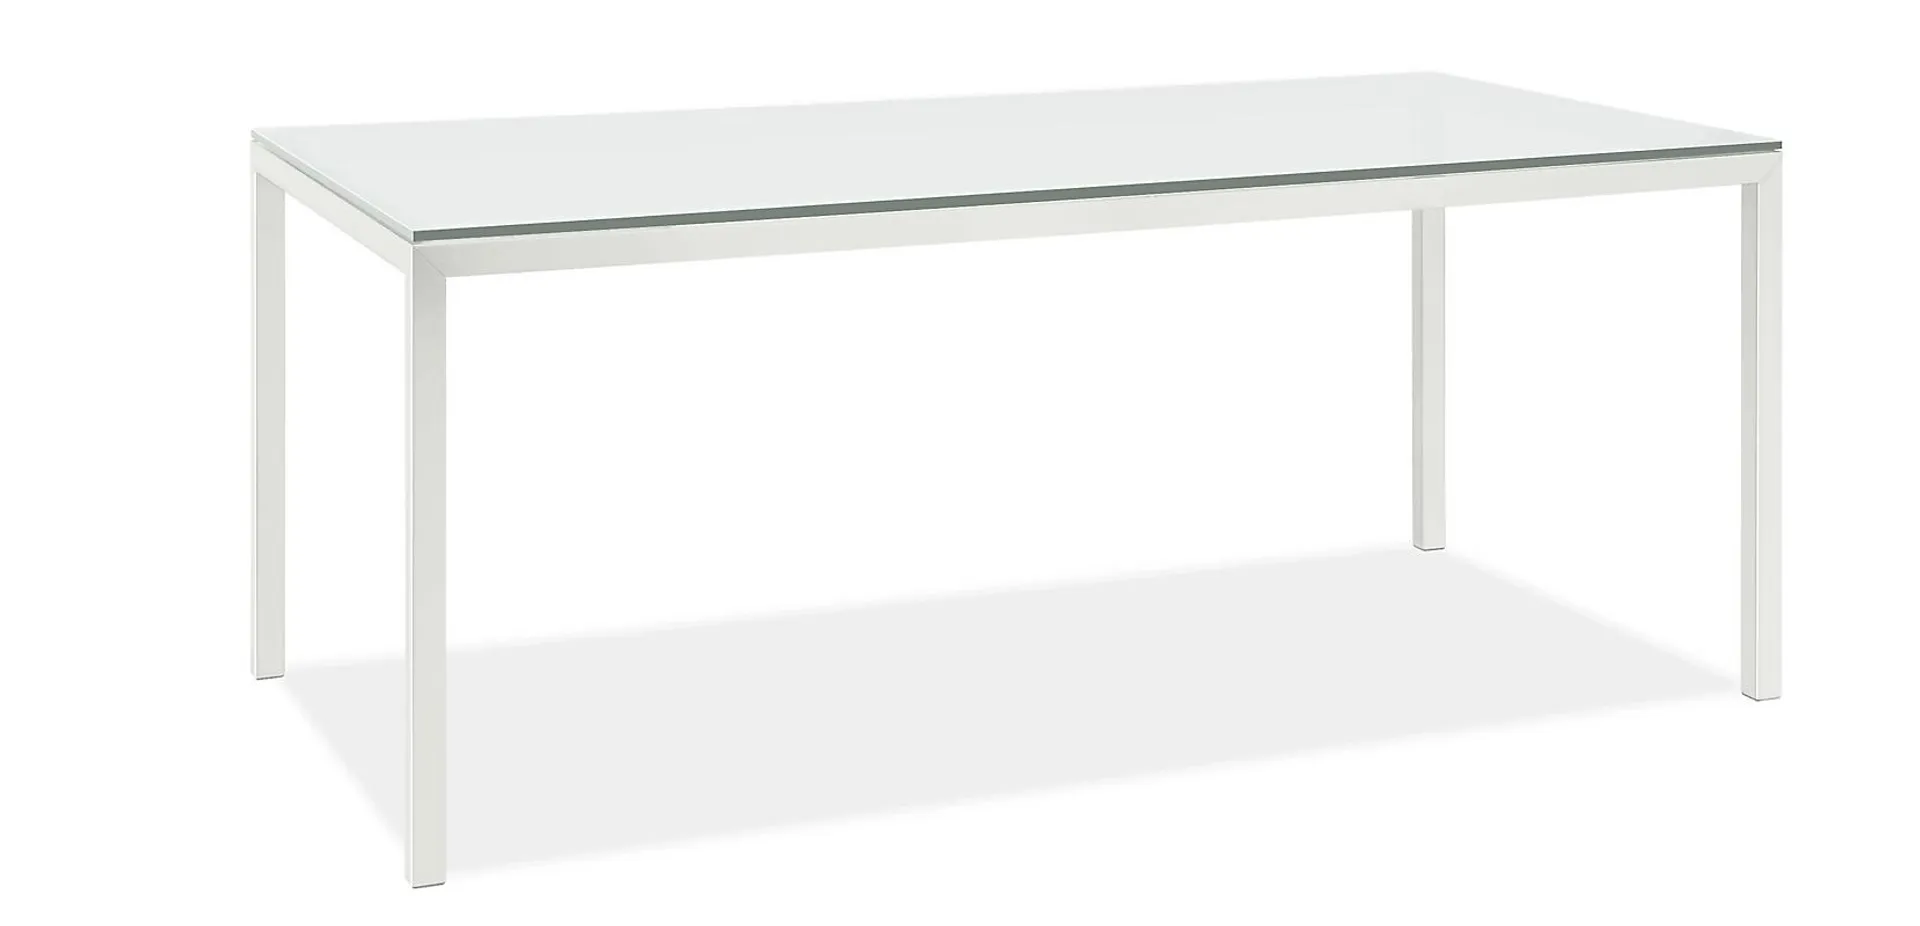 Parsons 72w 30d 35h Counter Table in 1.5" White w/TMPRD White Satin Etch Glass